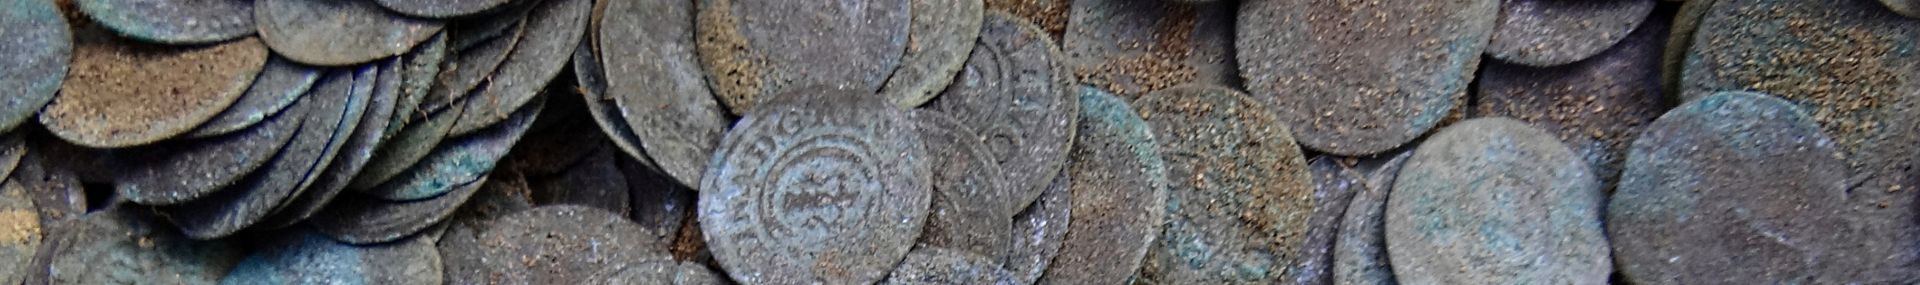 Ancient coins for Numismatic Research